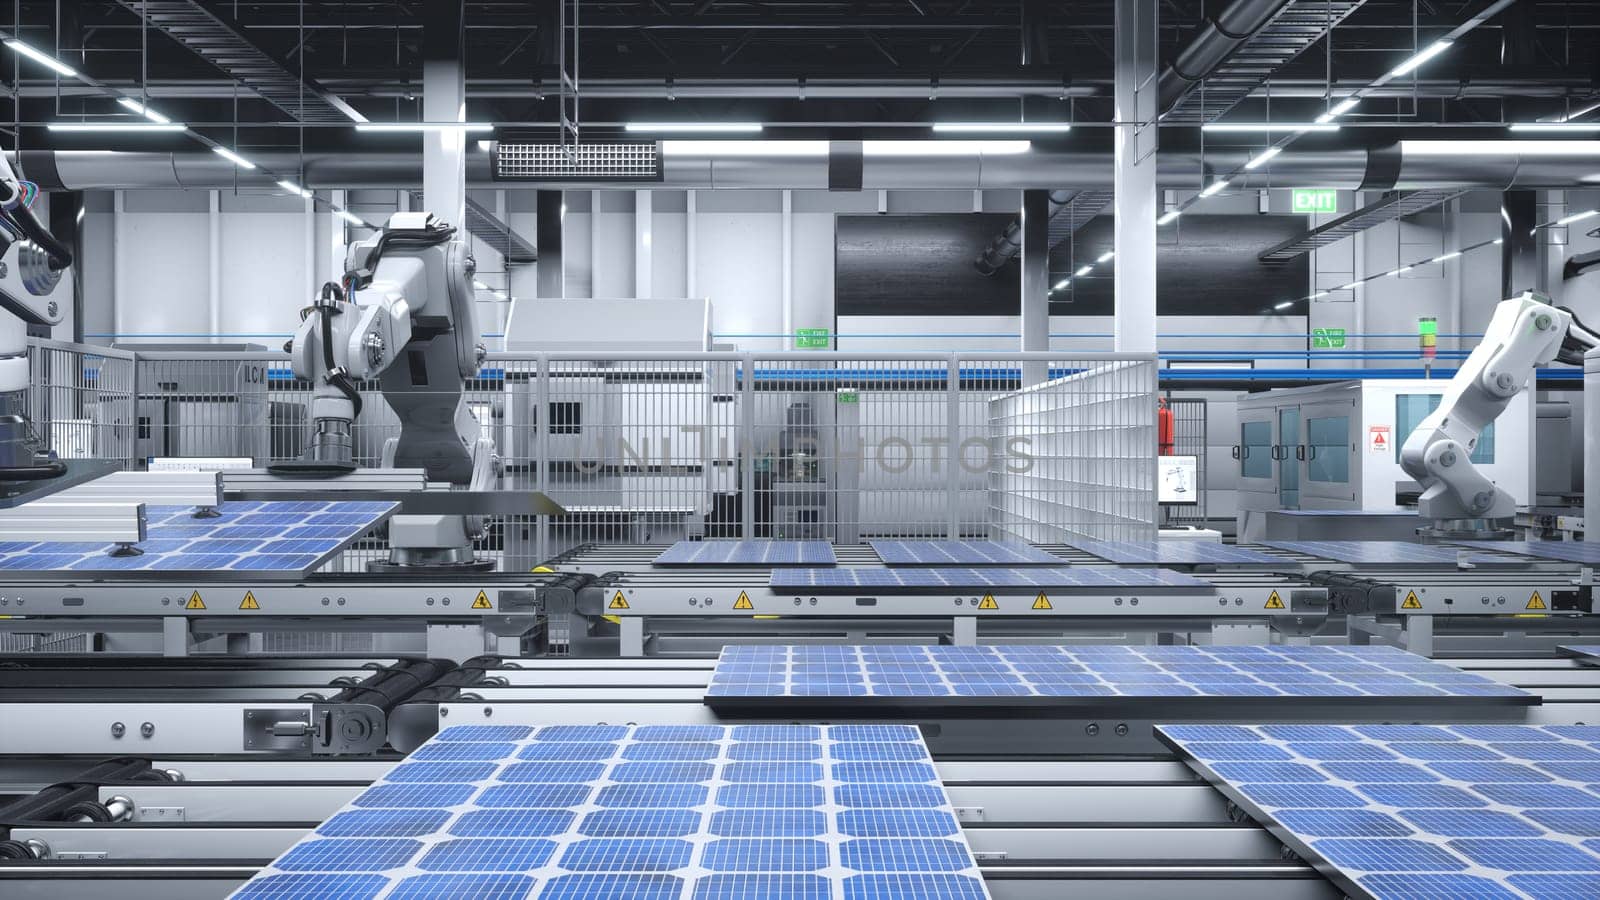 Cutting edge manufacturing warehouse producing solar cells by DCStudio